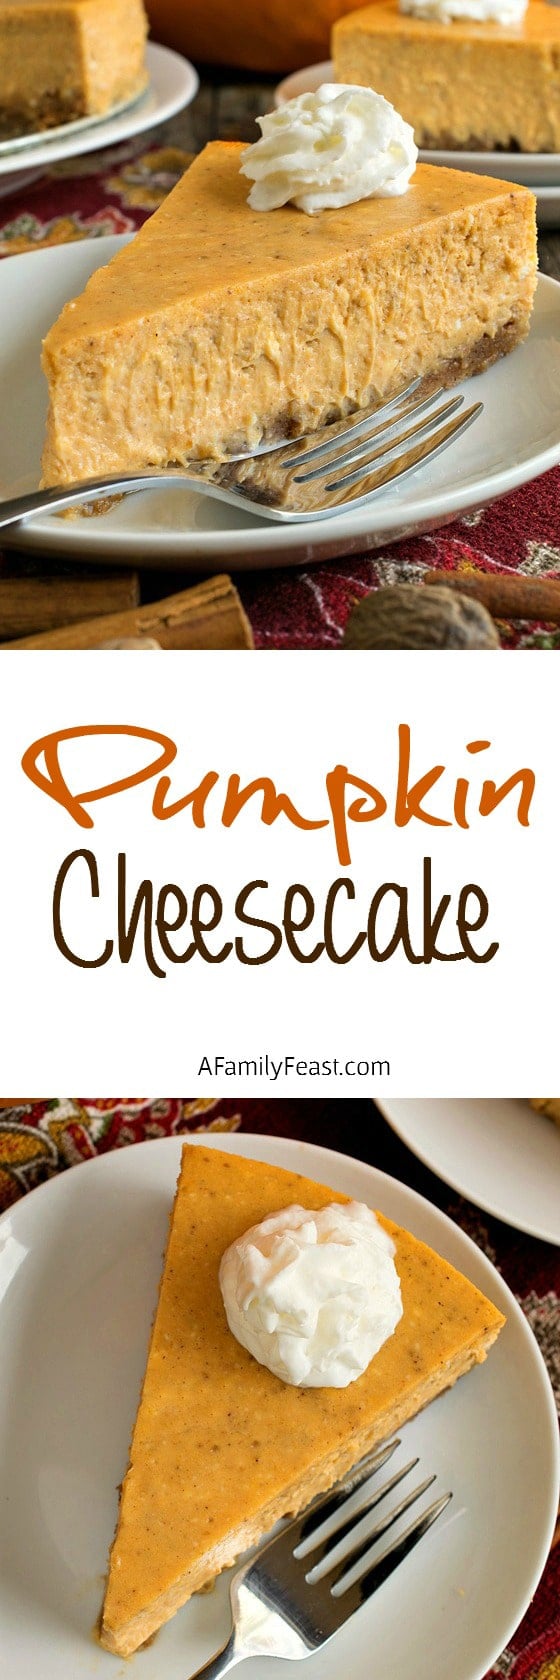 This is a must-make dessert for your family's Thanksgiving! A creamy, delicious and decadent pumpkin cheesecake adapted from a recipe by Paula Deen.